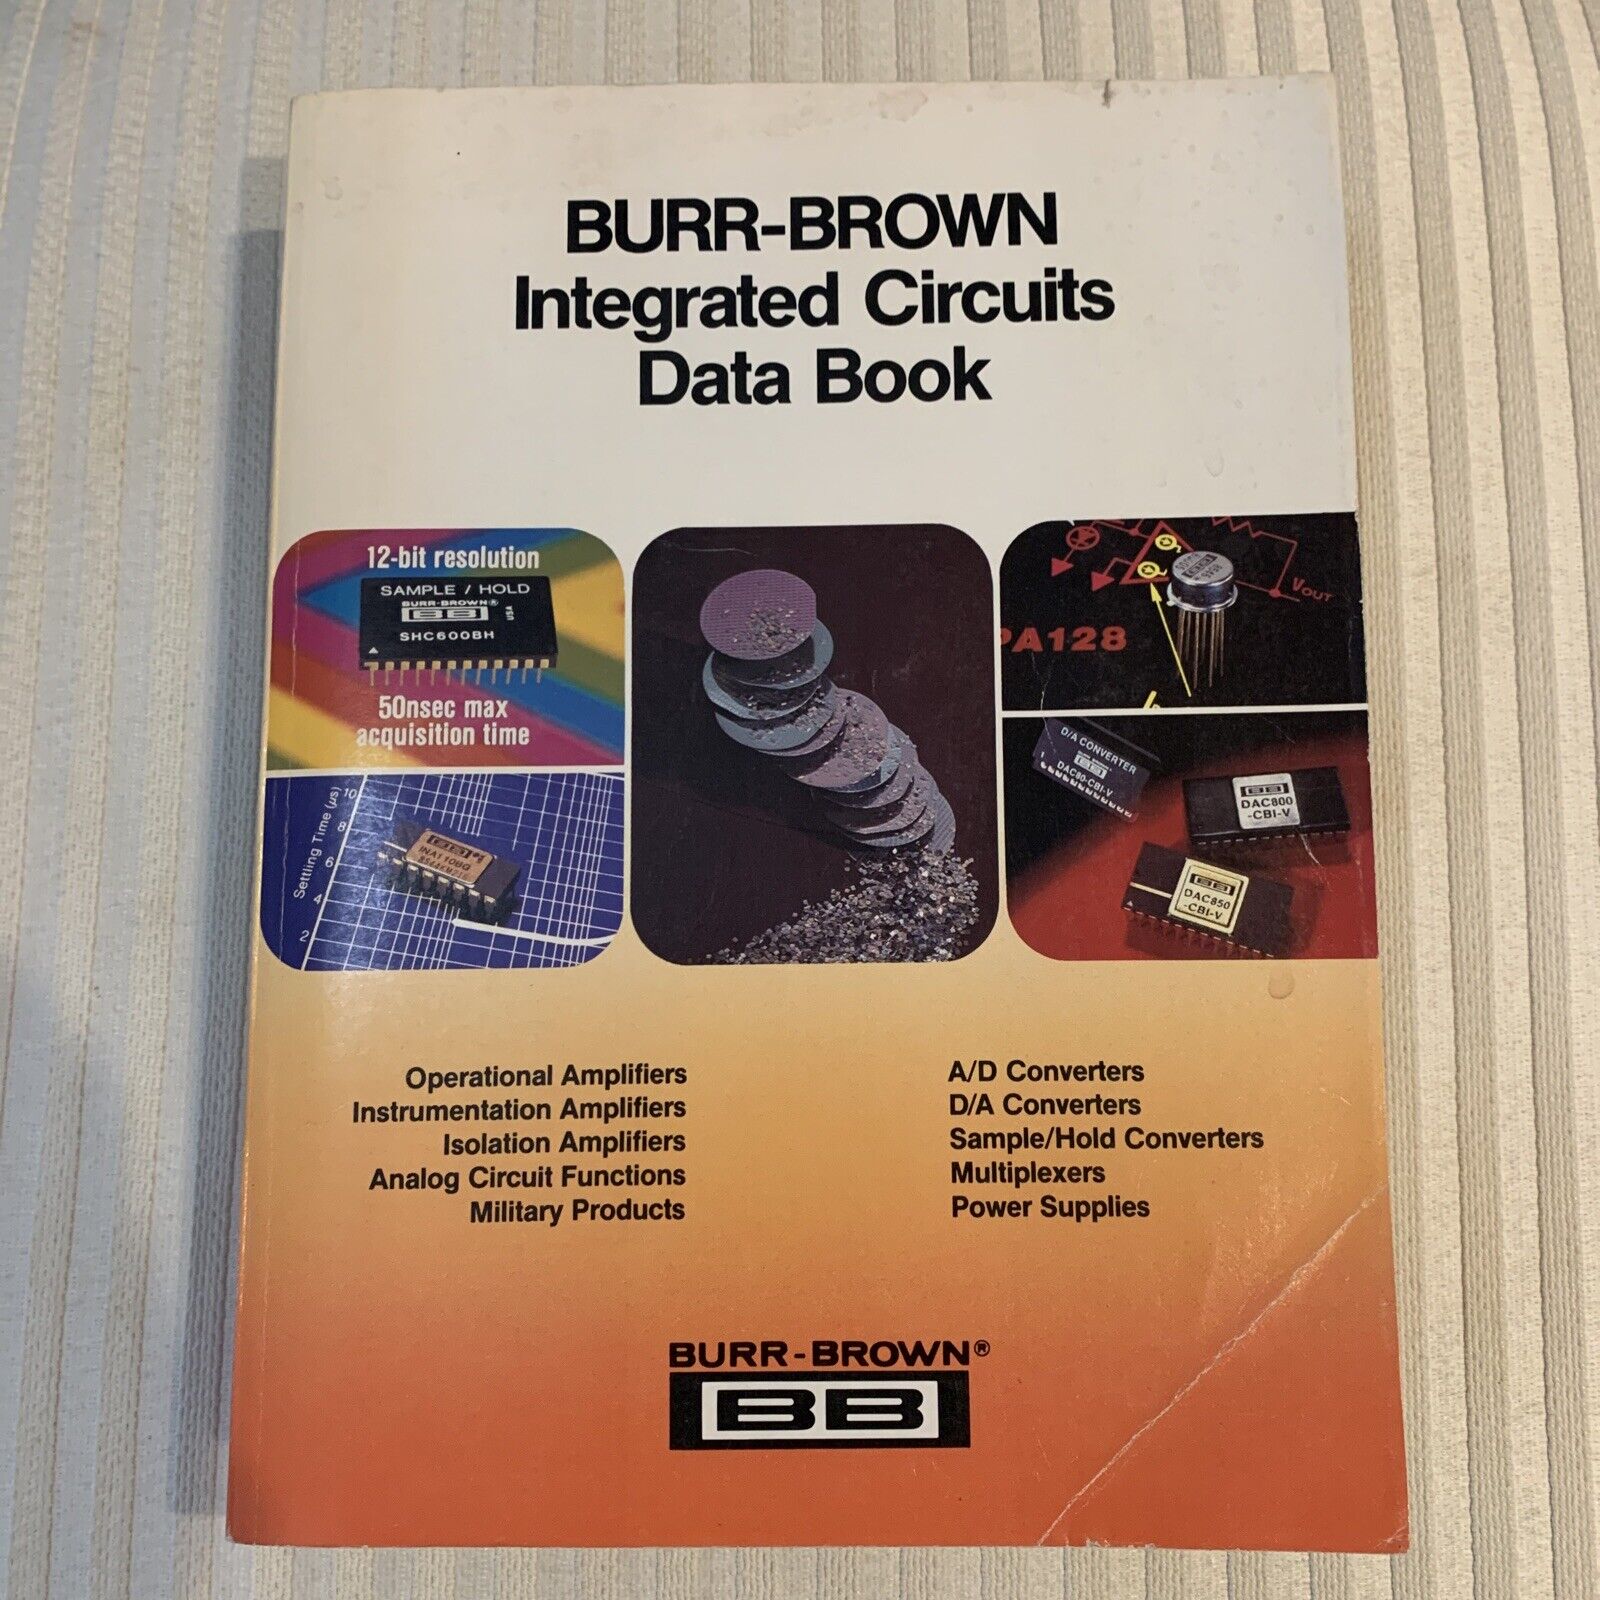 BURR-BROWN Integrated Circuits Data Book 1986 Softcover Vintage